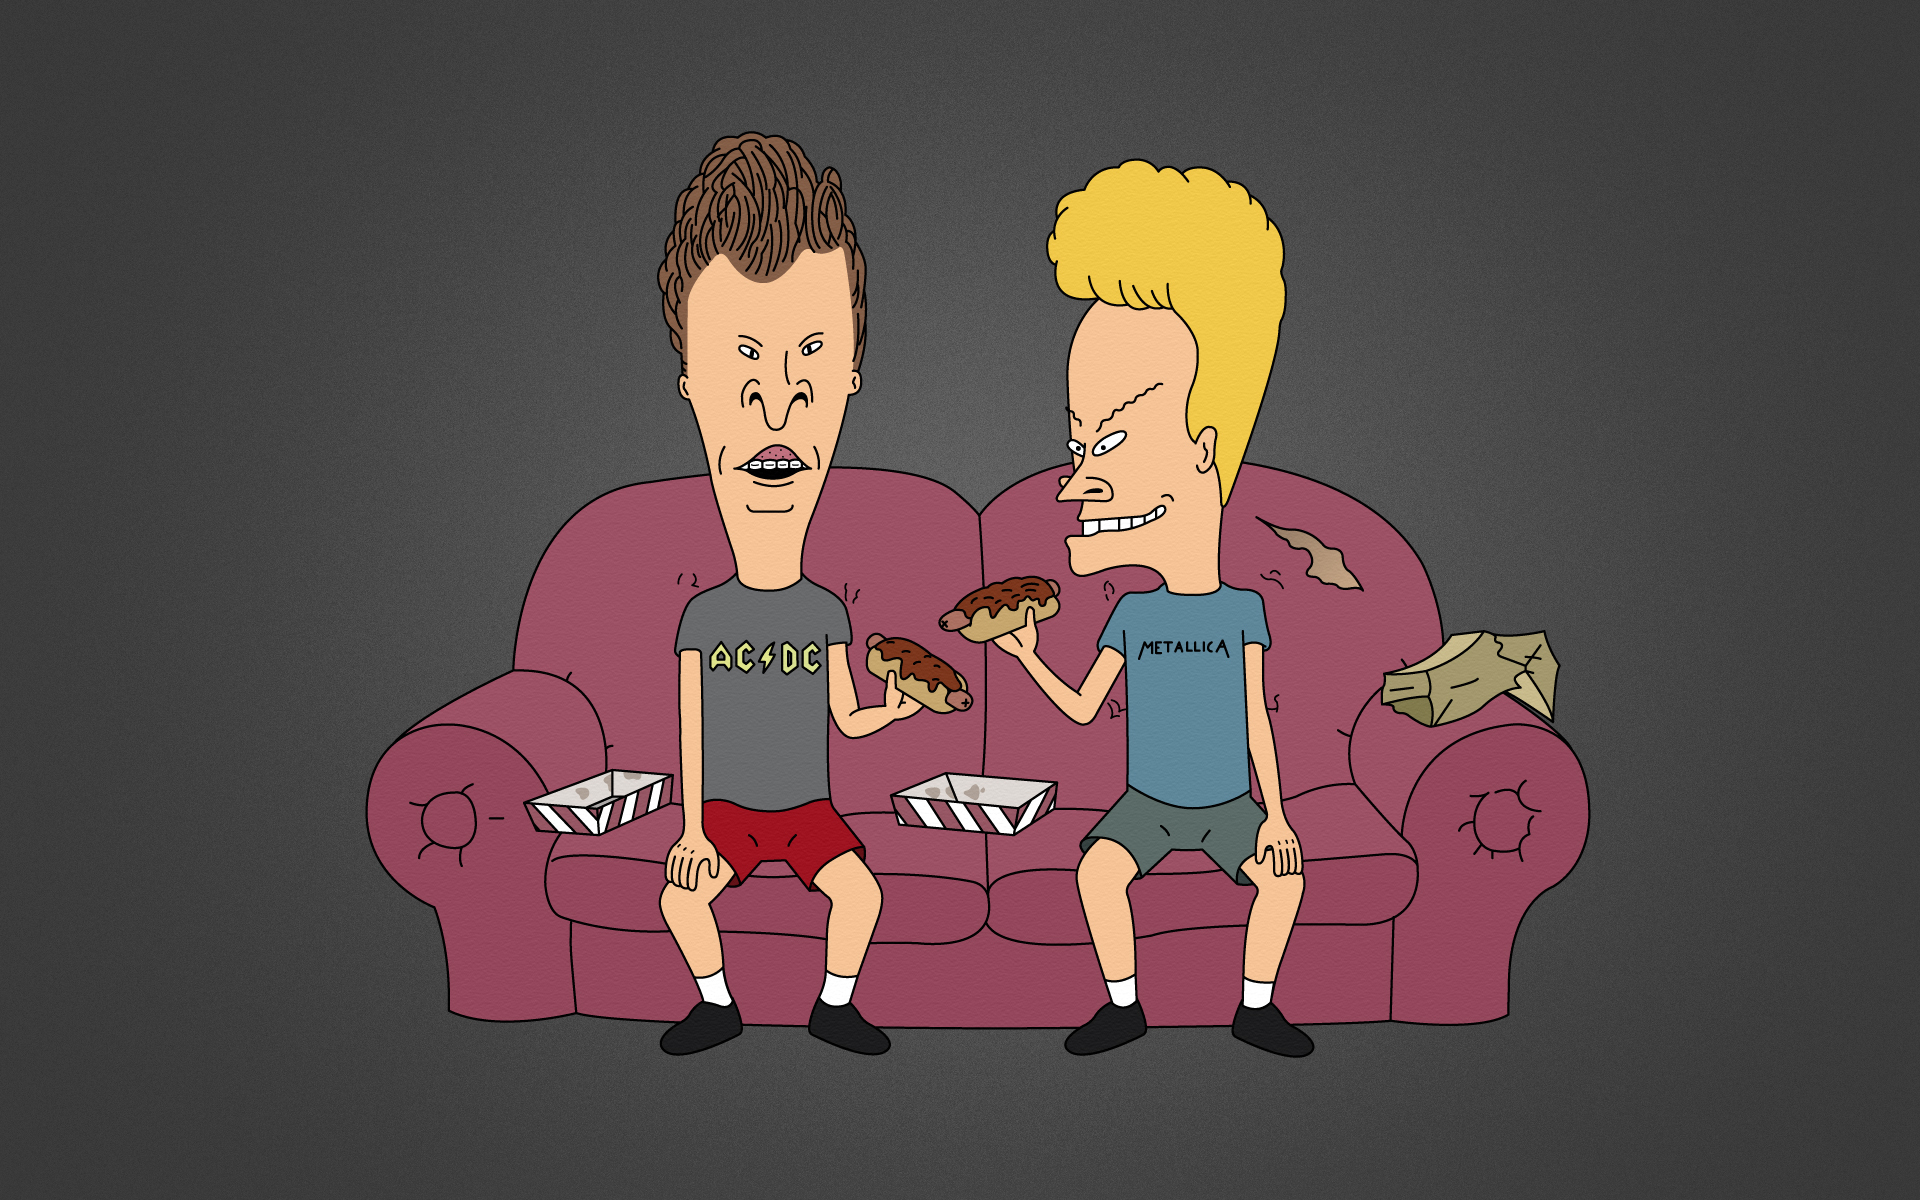 download beavis and butthead paramount+